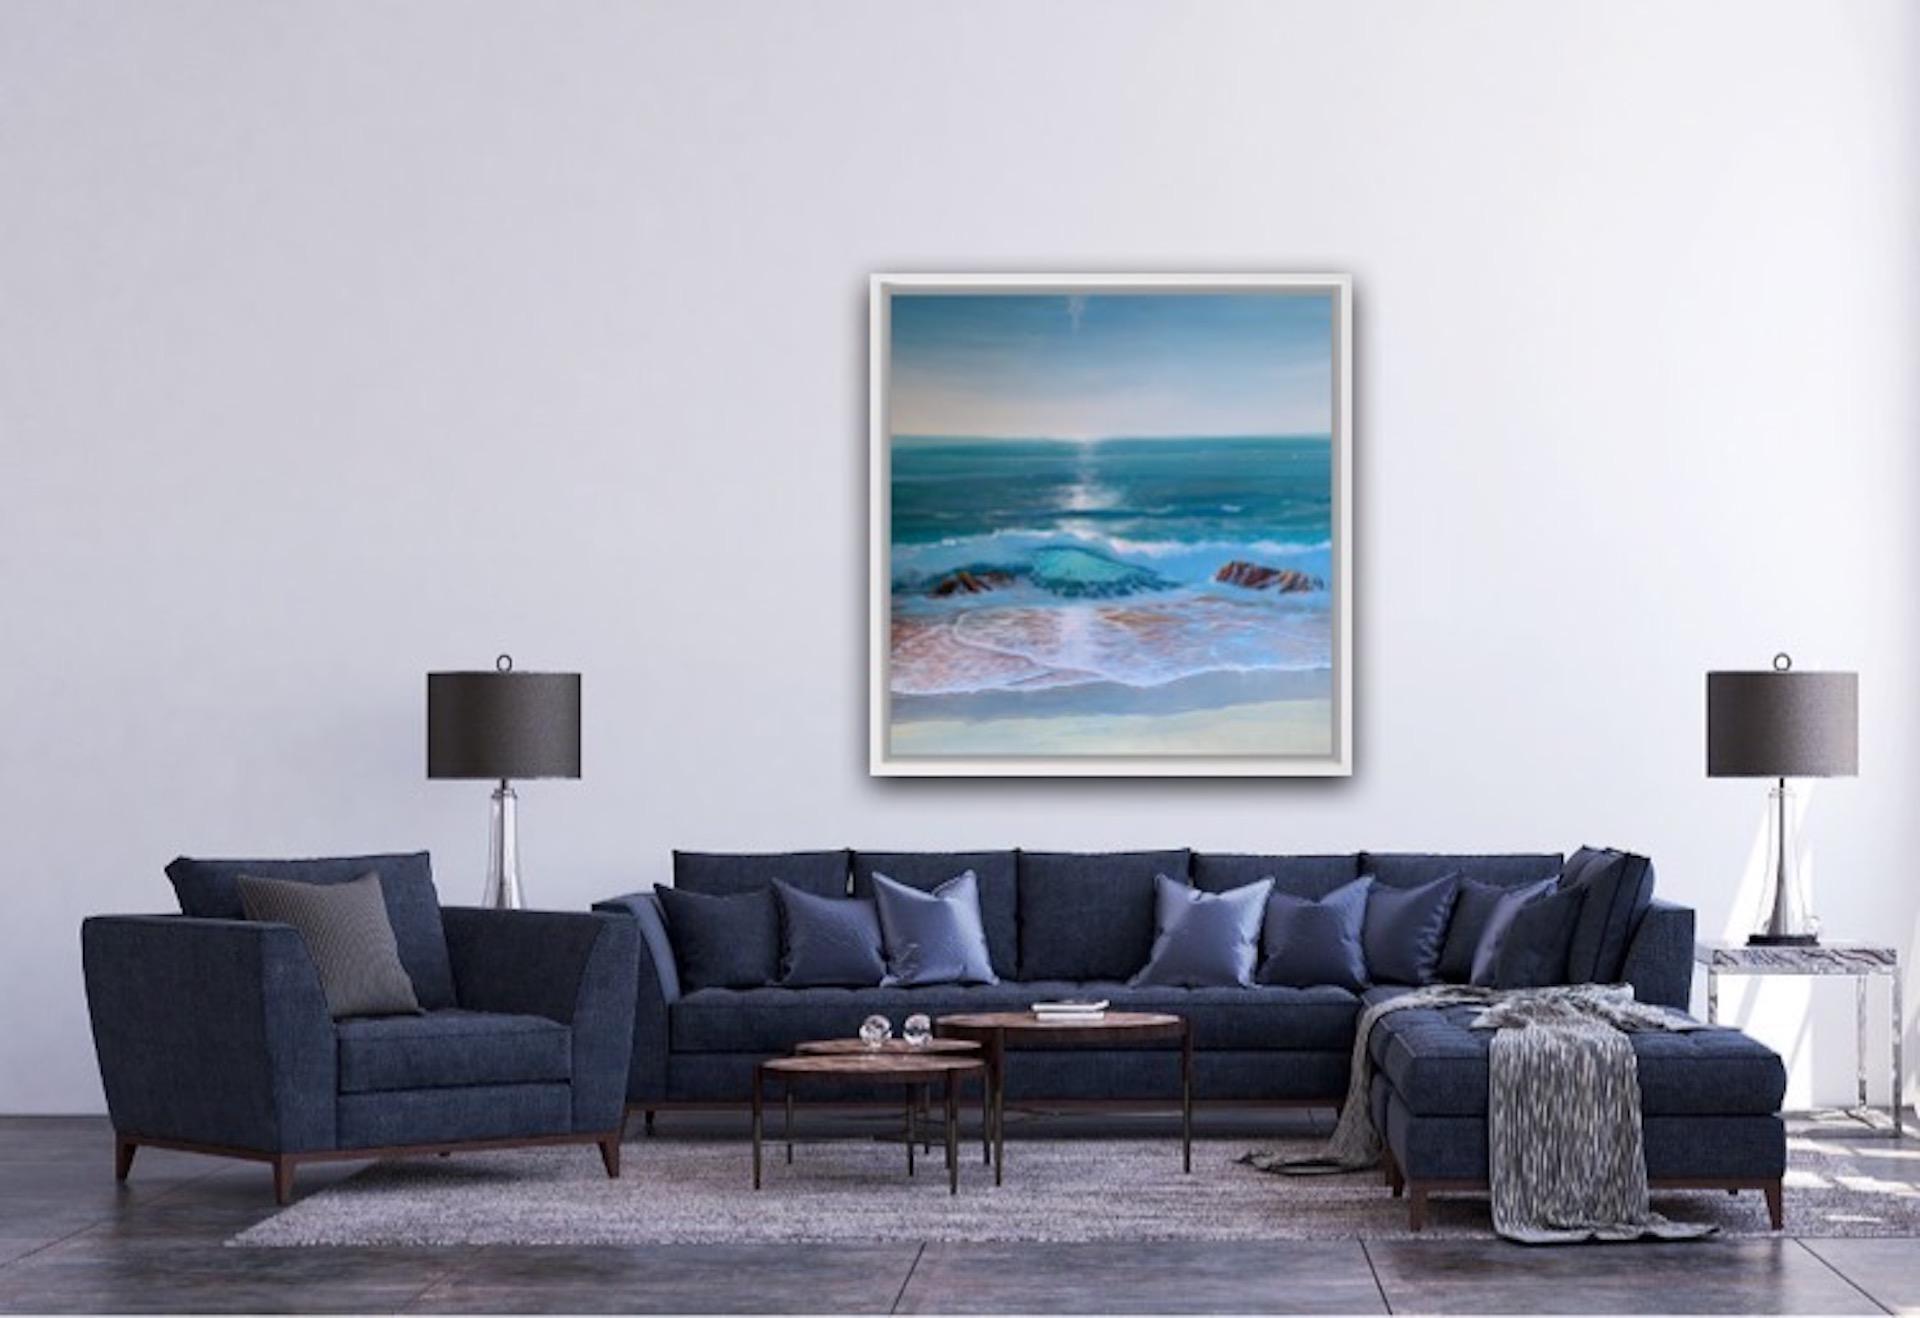 Carolyn Tyrer
Dancing Waves
Contemporary Seascape Painting
Acrylic Paint on Canvas
Canvas Size: H 100cm x W 100cm
Sold Unframed
Please note that insitu images are purely an indication of how a piece may look

Dancing Waves is an original painting by